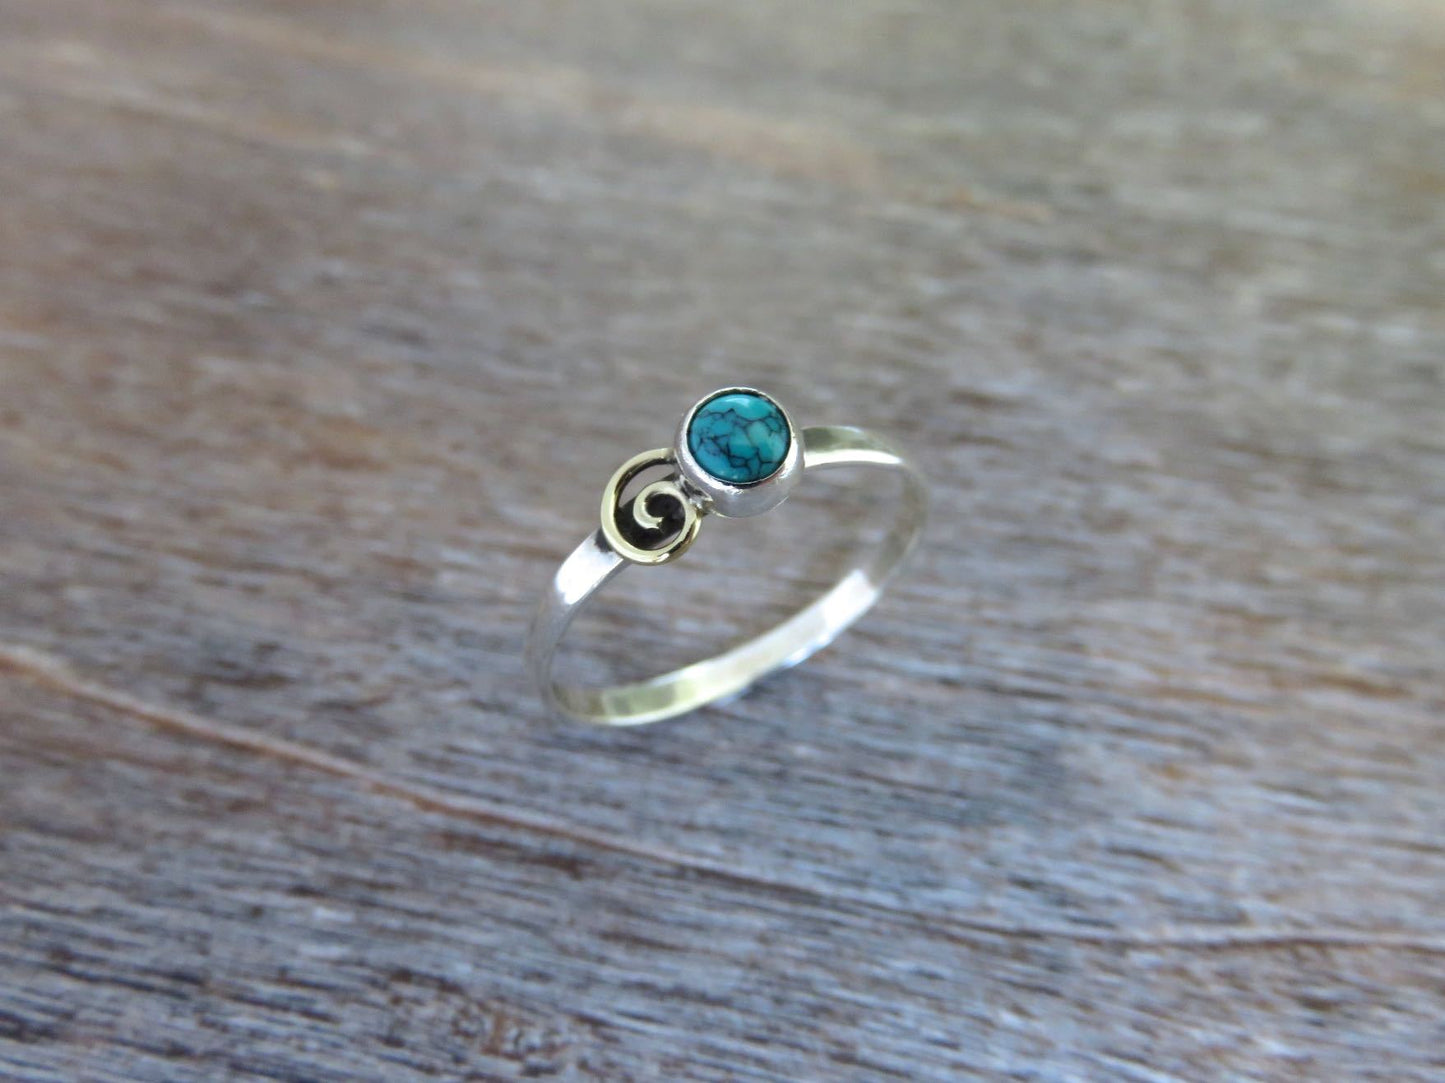 Silver ring with spiral made of brass and turquoise stone 